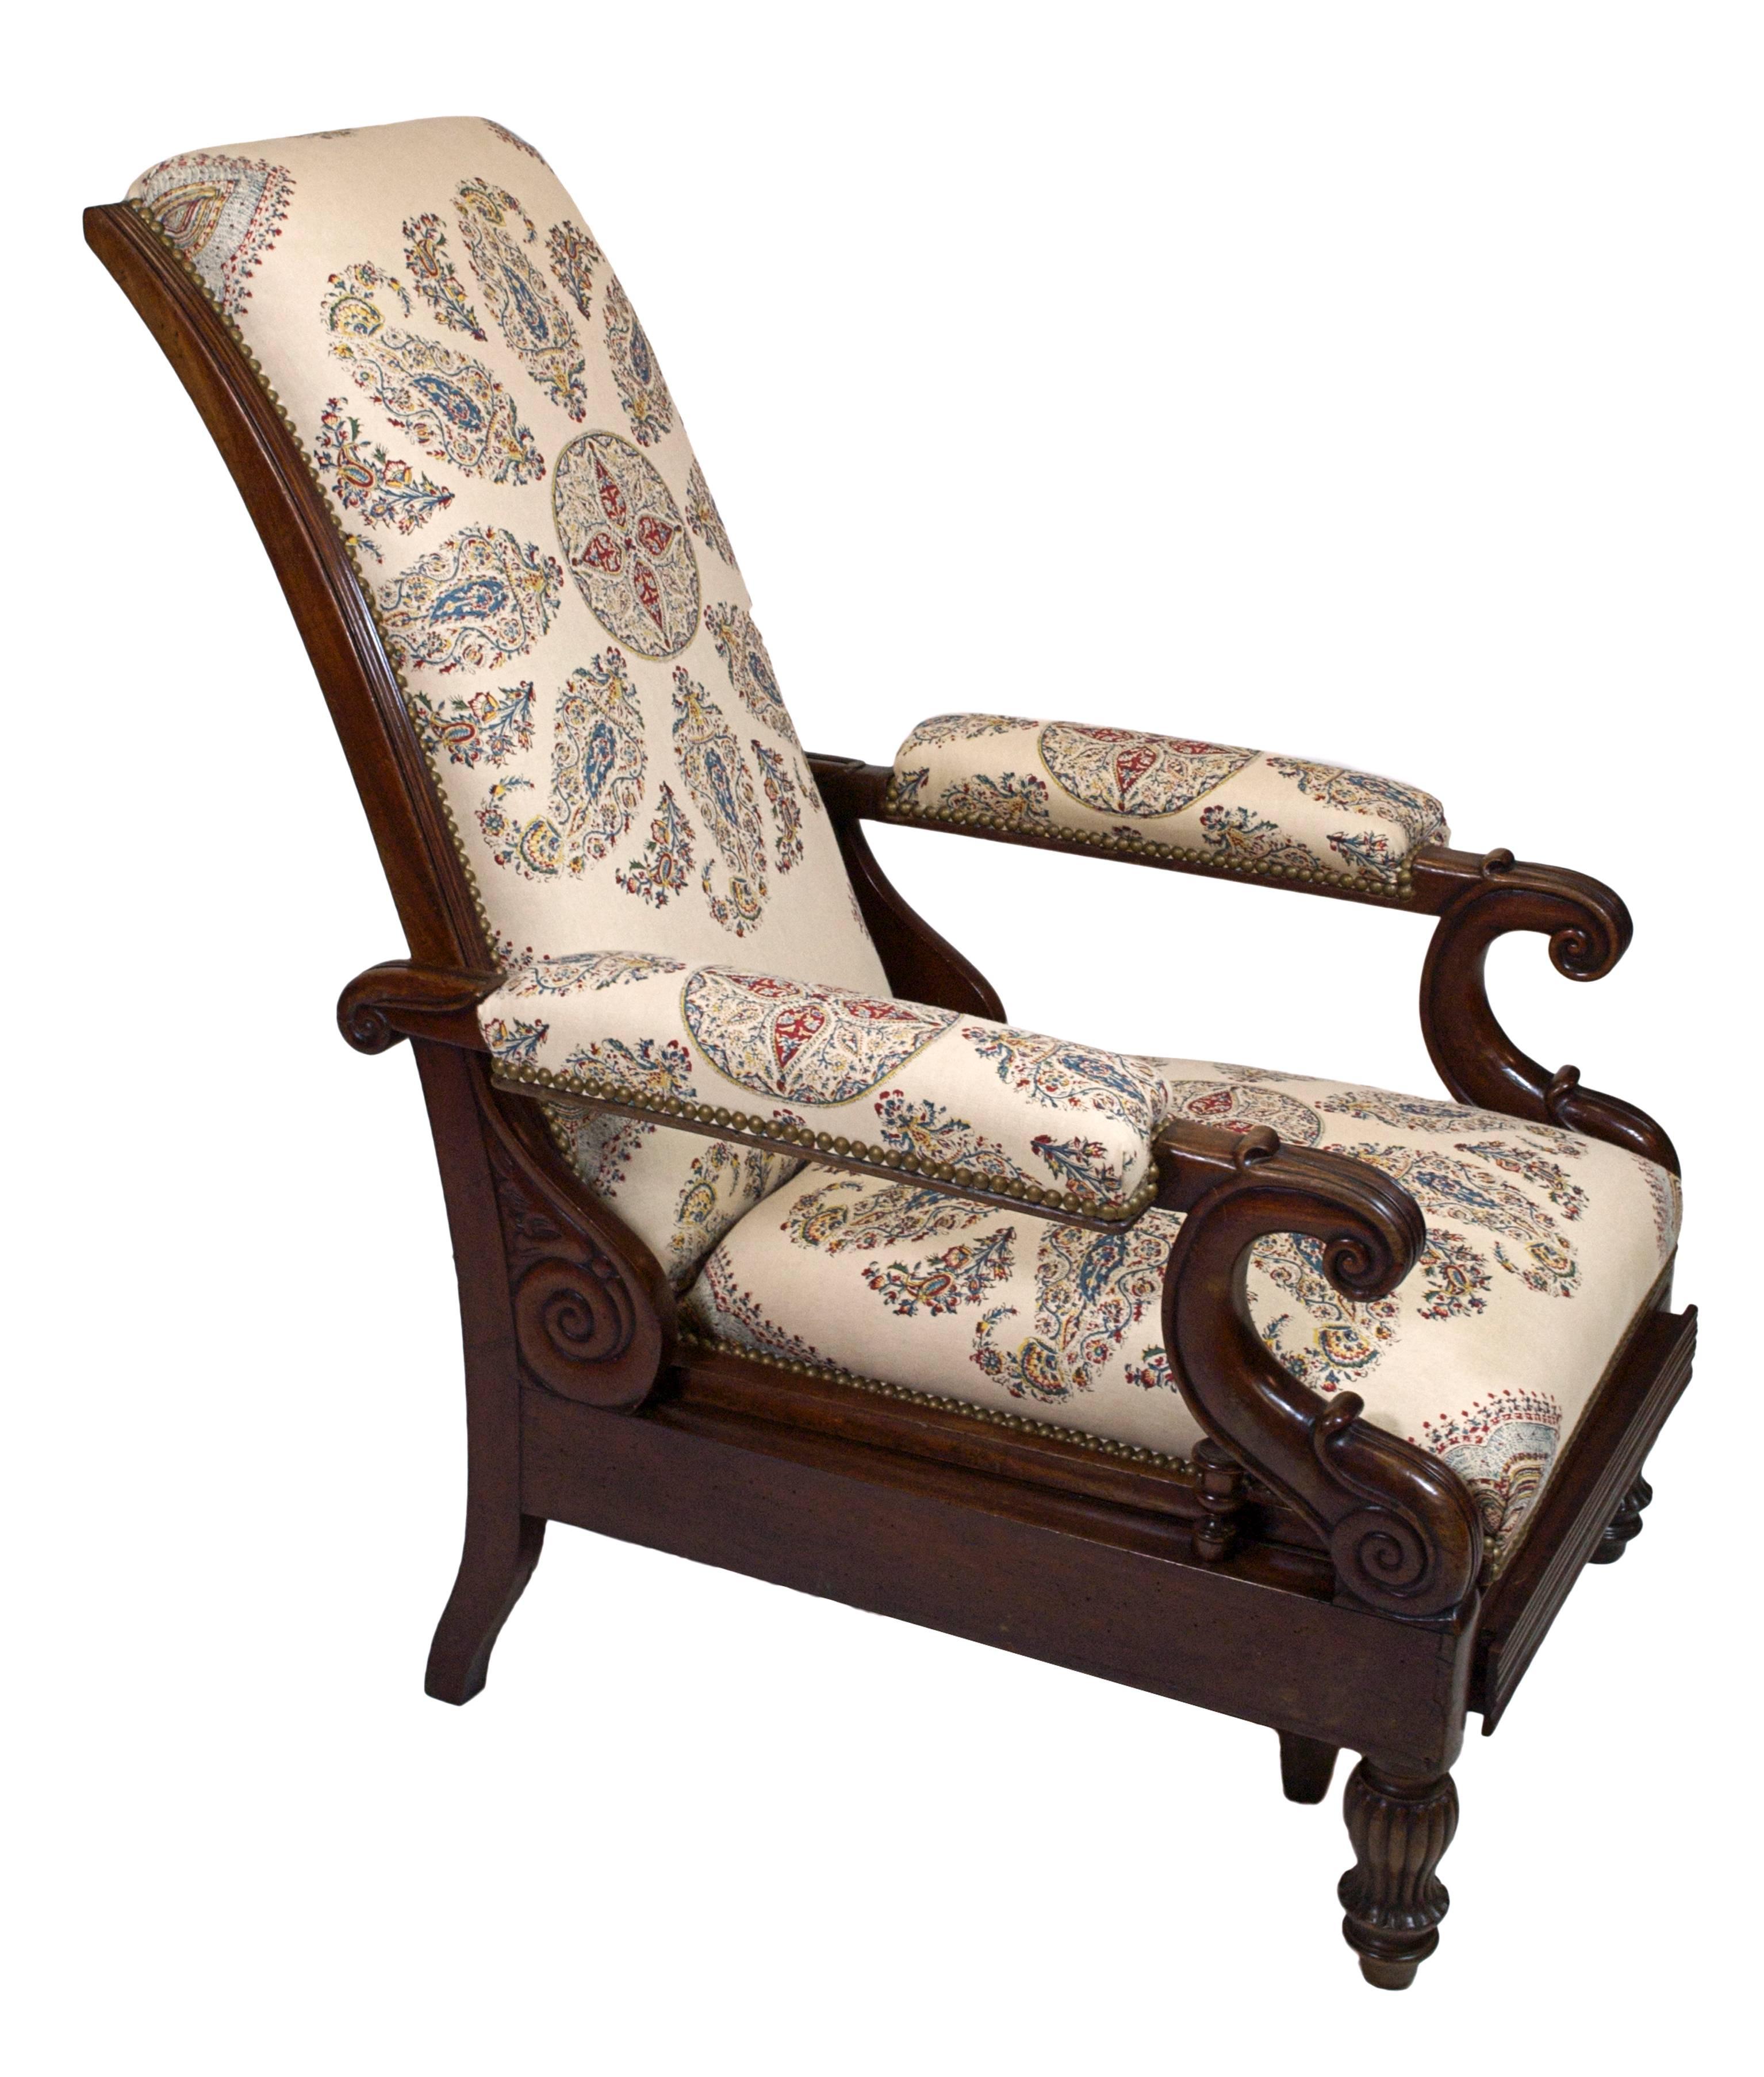 French Late Empire Mahogany Armchair Featuring Hand-Printed Blue and Red Paisley Linen